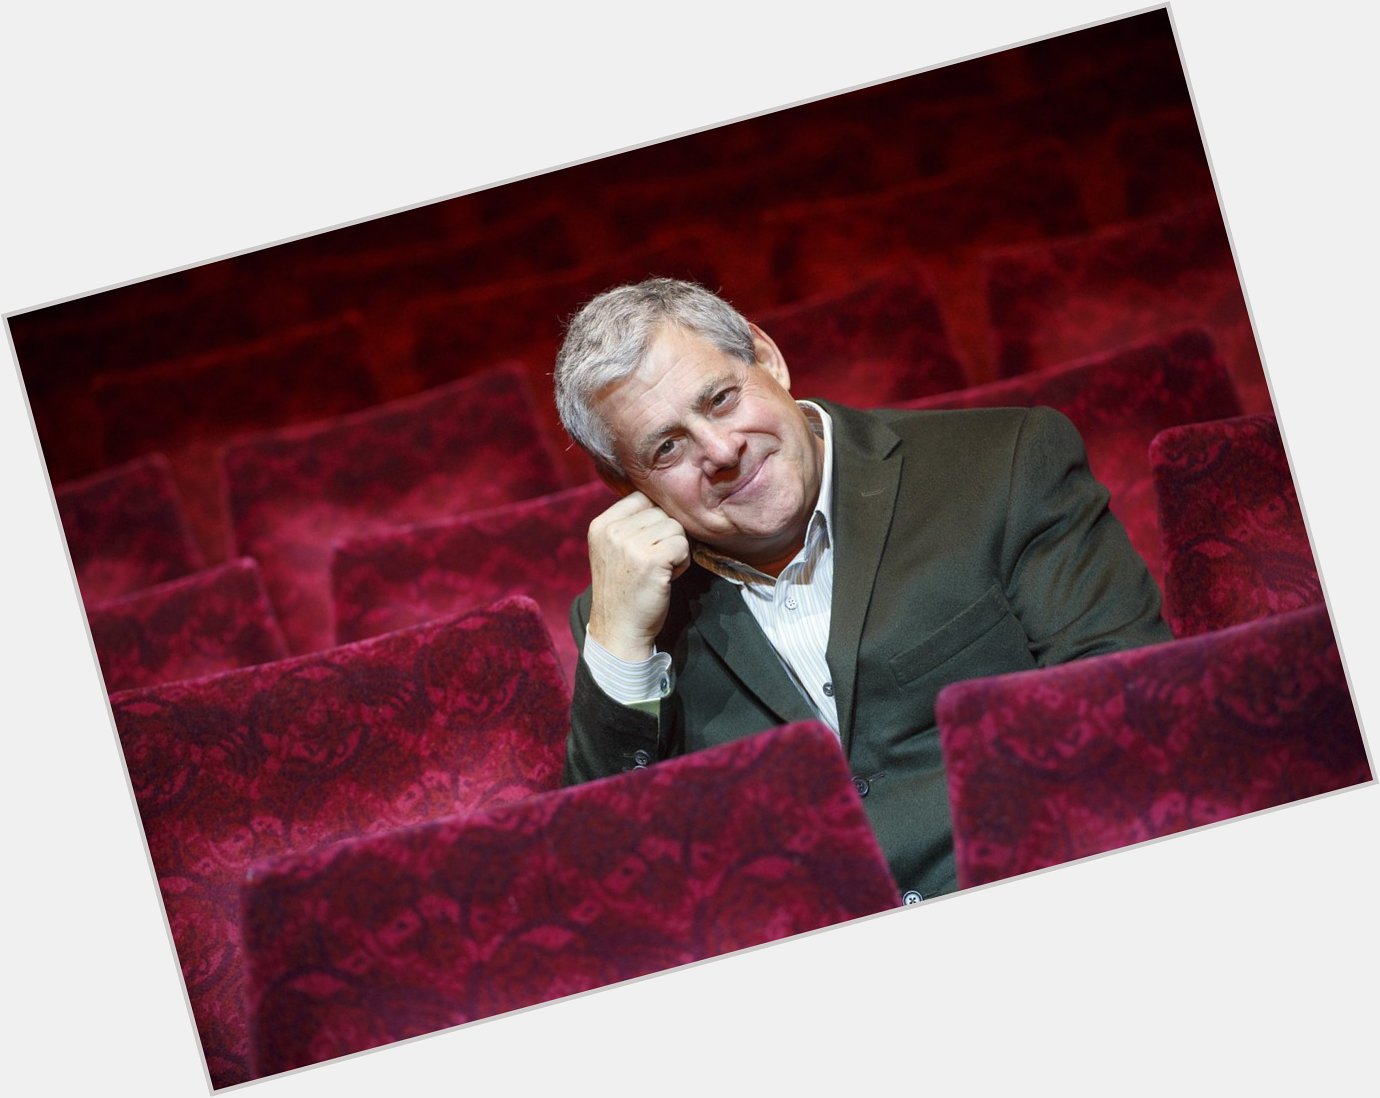 To the producer who makes possible, from all of us, Happy birthday, Cameron Mackintosh! 